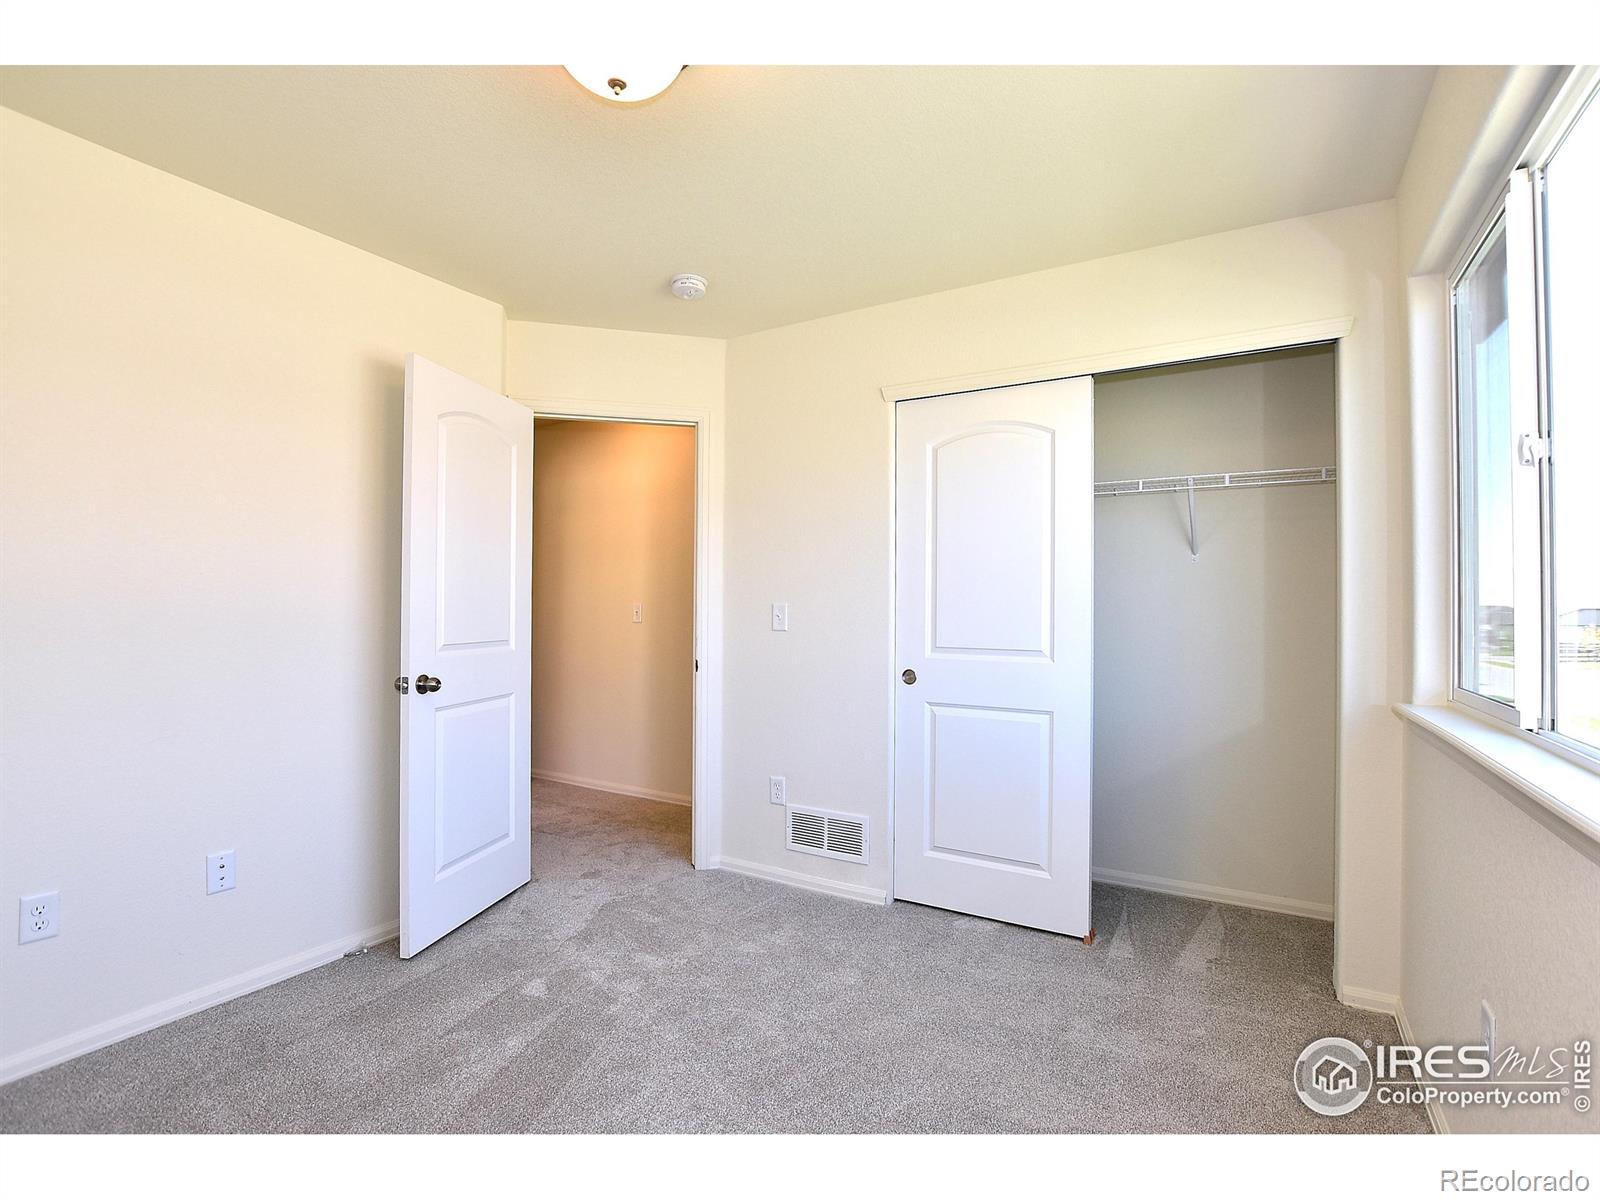 10205 16th, Greeley, CO